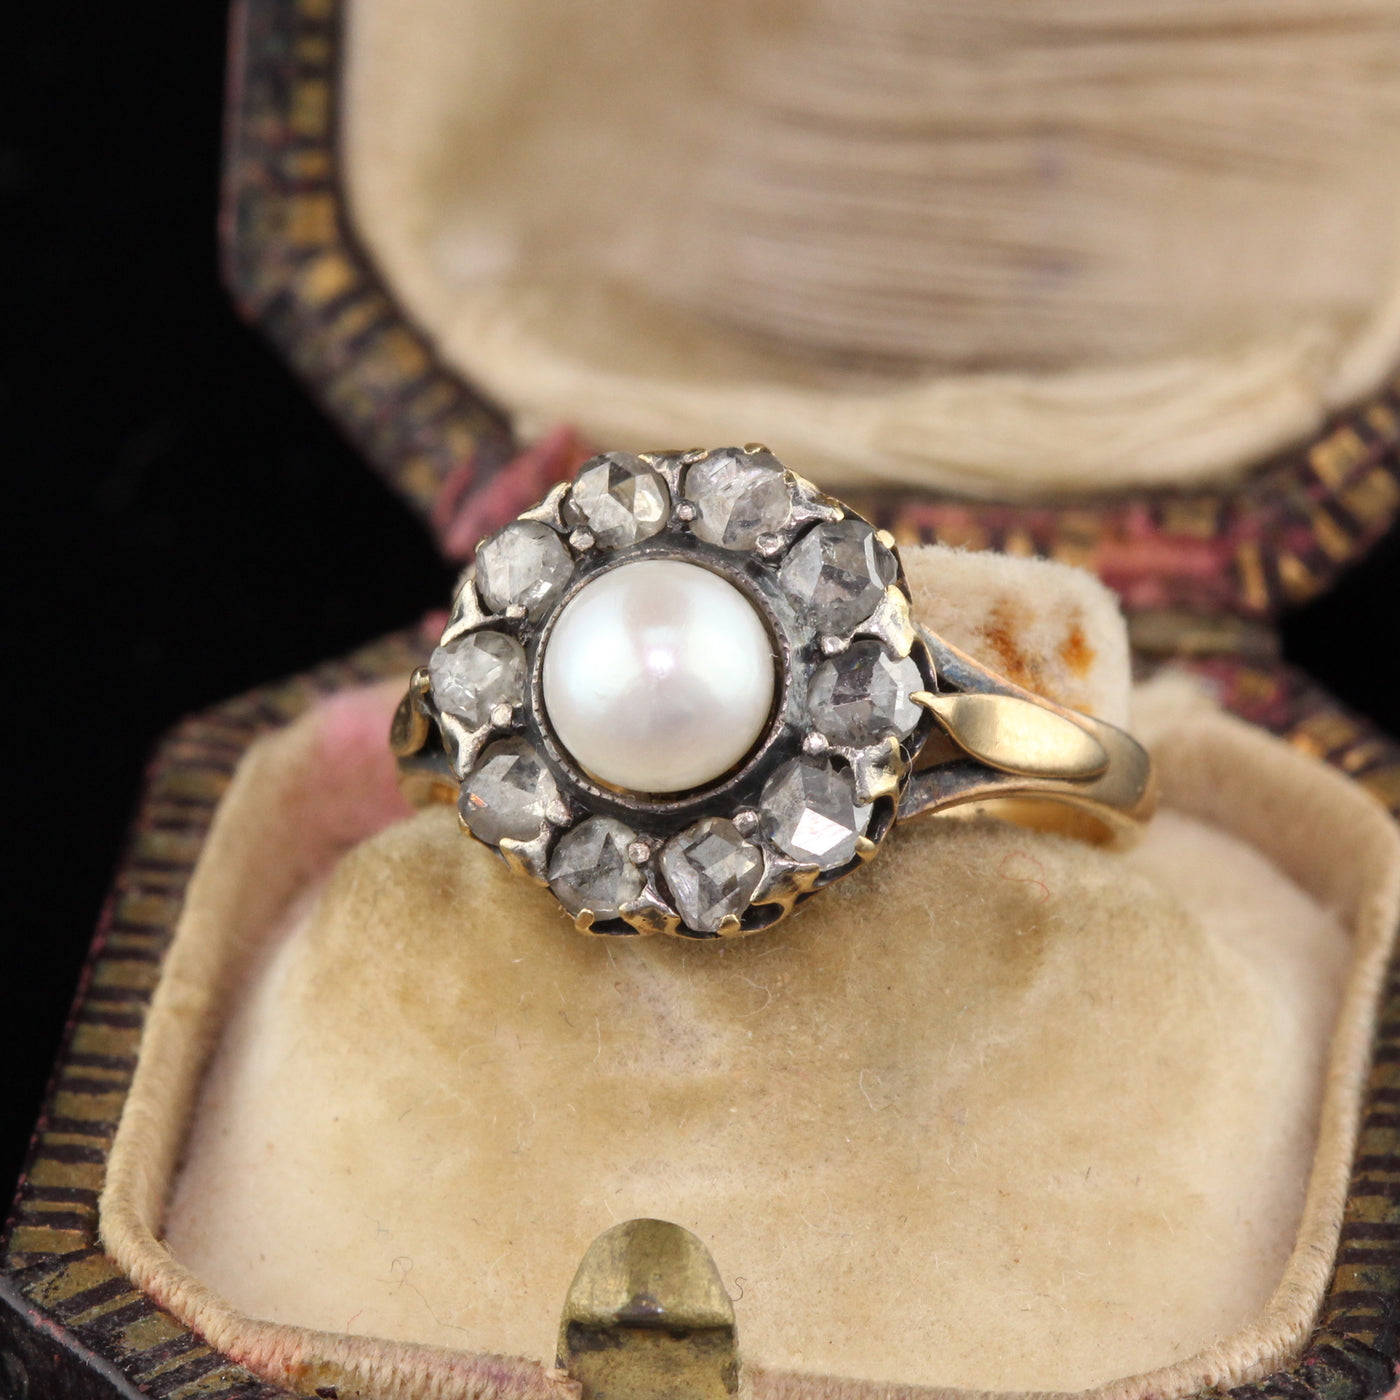 Antique Victorian 18K Yellow Gold Rose Cut Diamond & Pearl Cluster Ring - The Antique Parlour